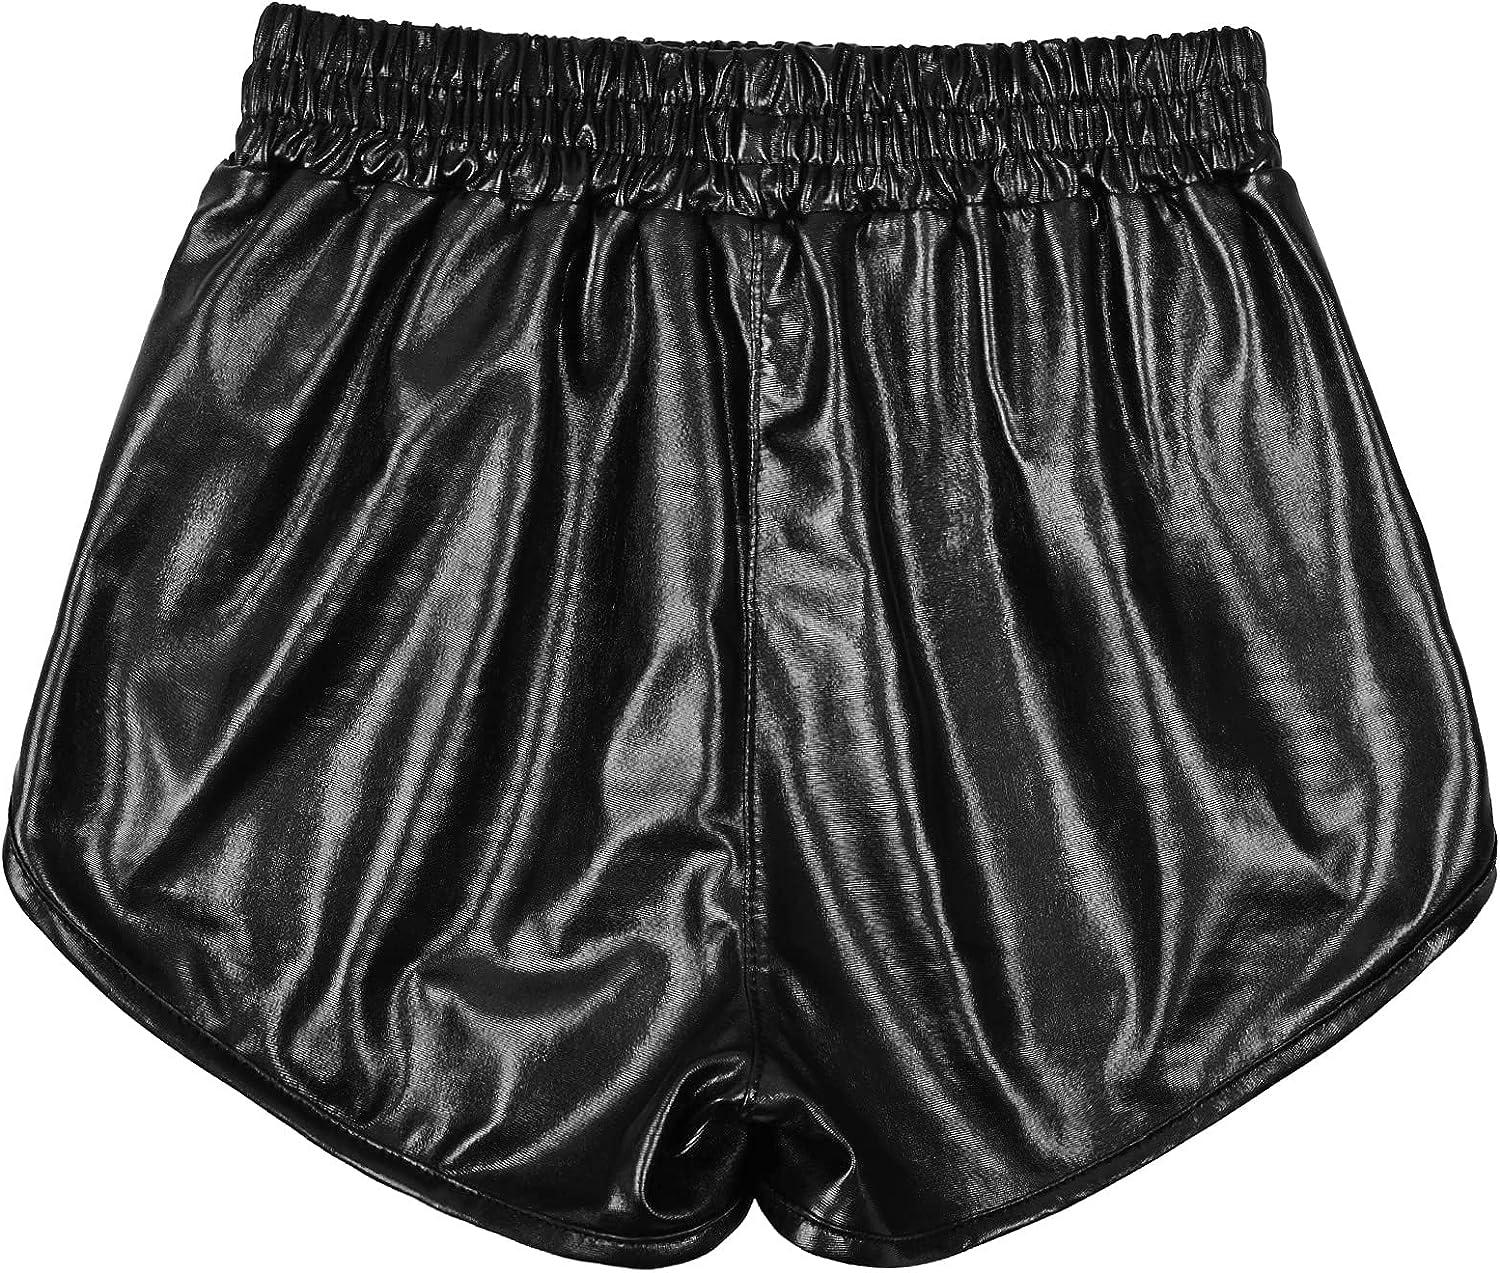 Mirawise Girls Metallic Shorts Shiny Hot Pants Sparkly Dance Outfits ...